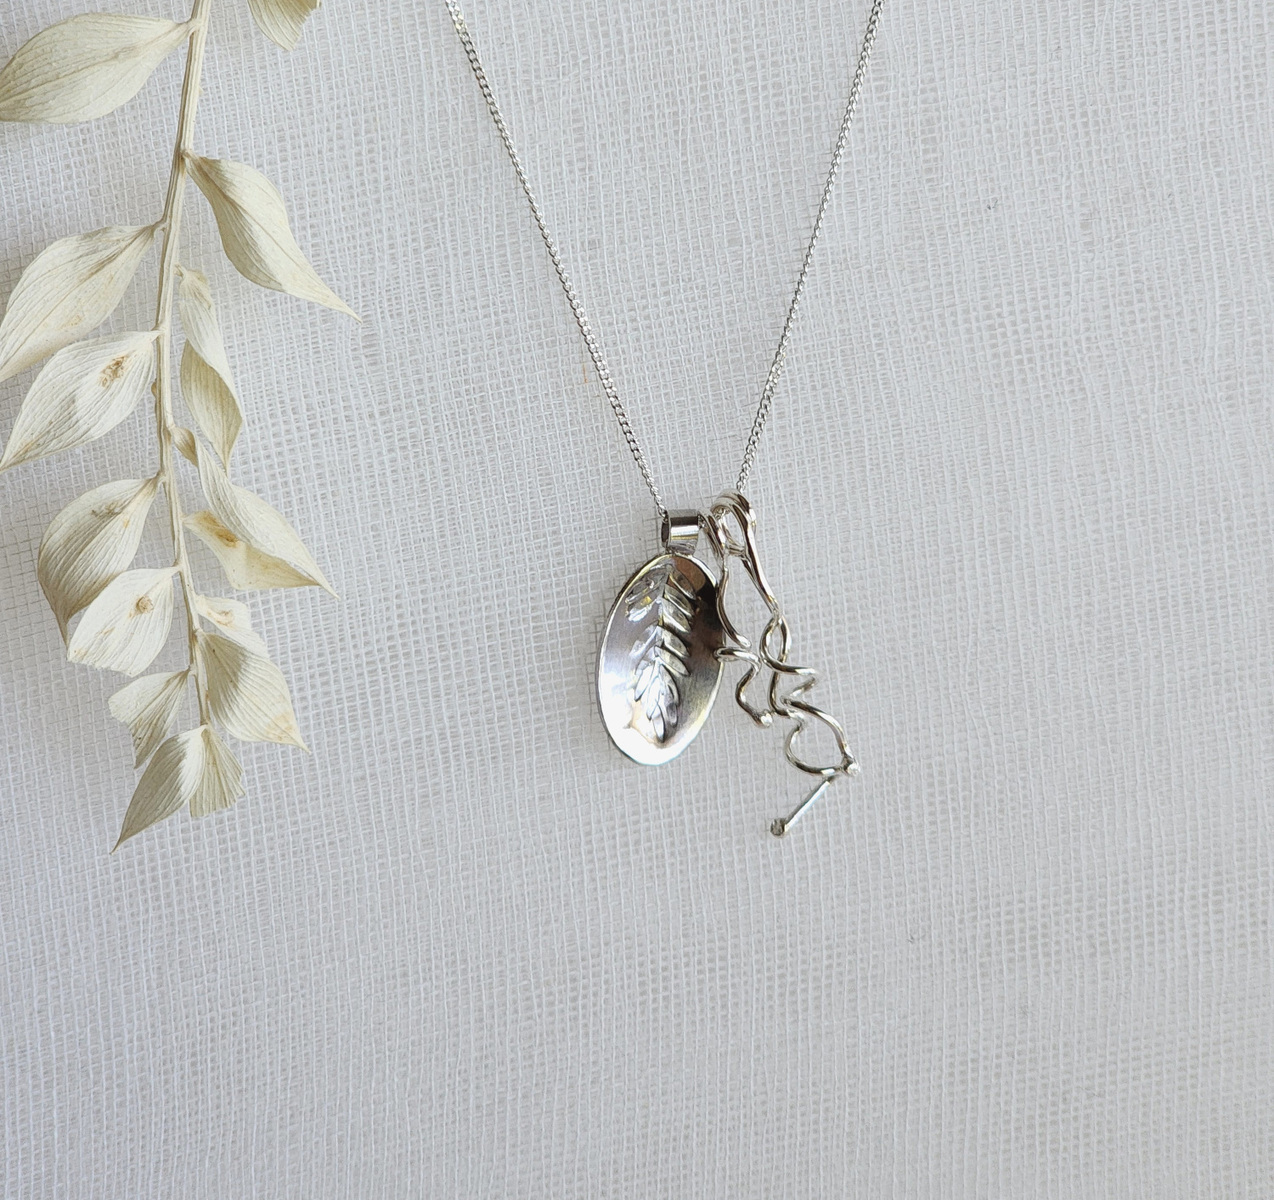 Leaves and Tendrils Necklace